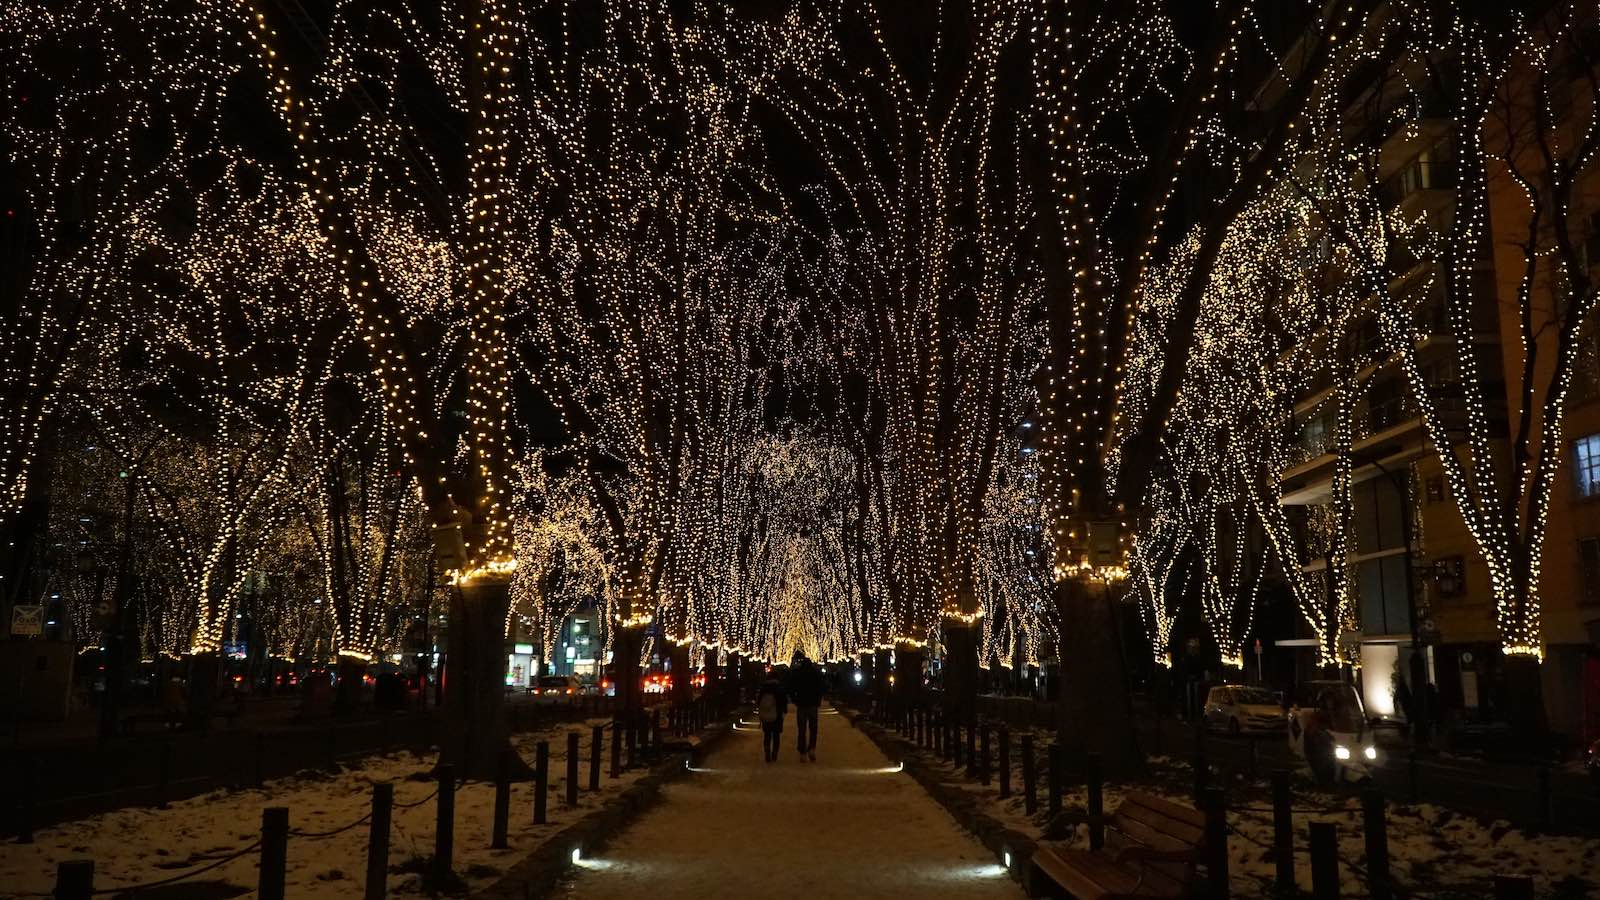 Came across this street right behind my hostel that is lit up with thousands of lights adorning the bare trees. It only happens in December and stops midnight on New Years Eve. I caught it on the last day!